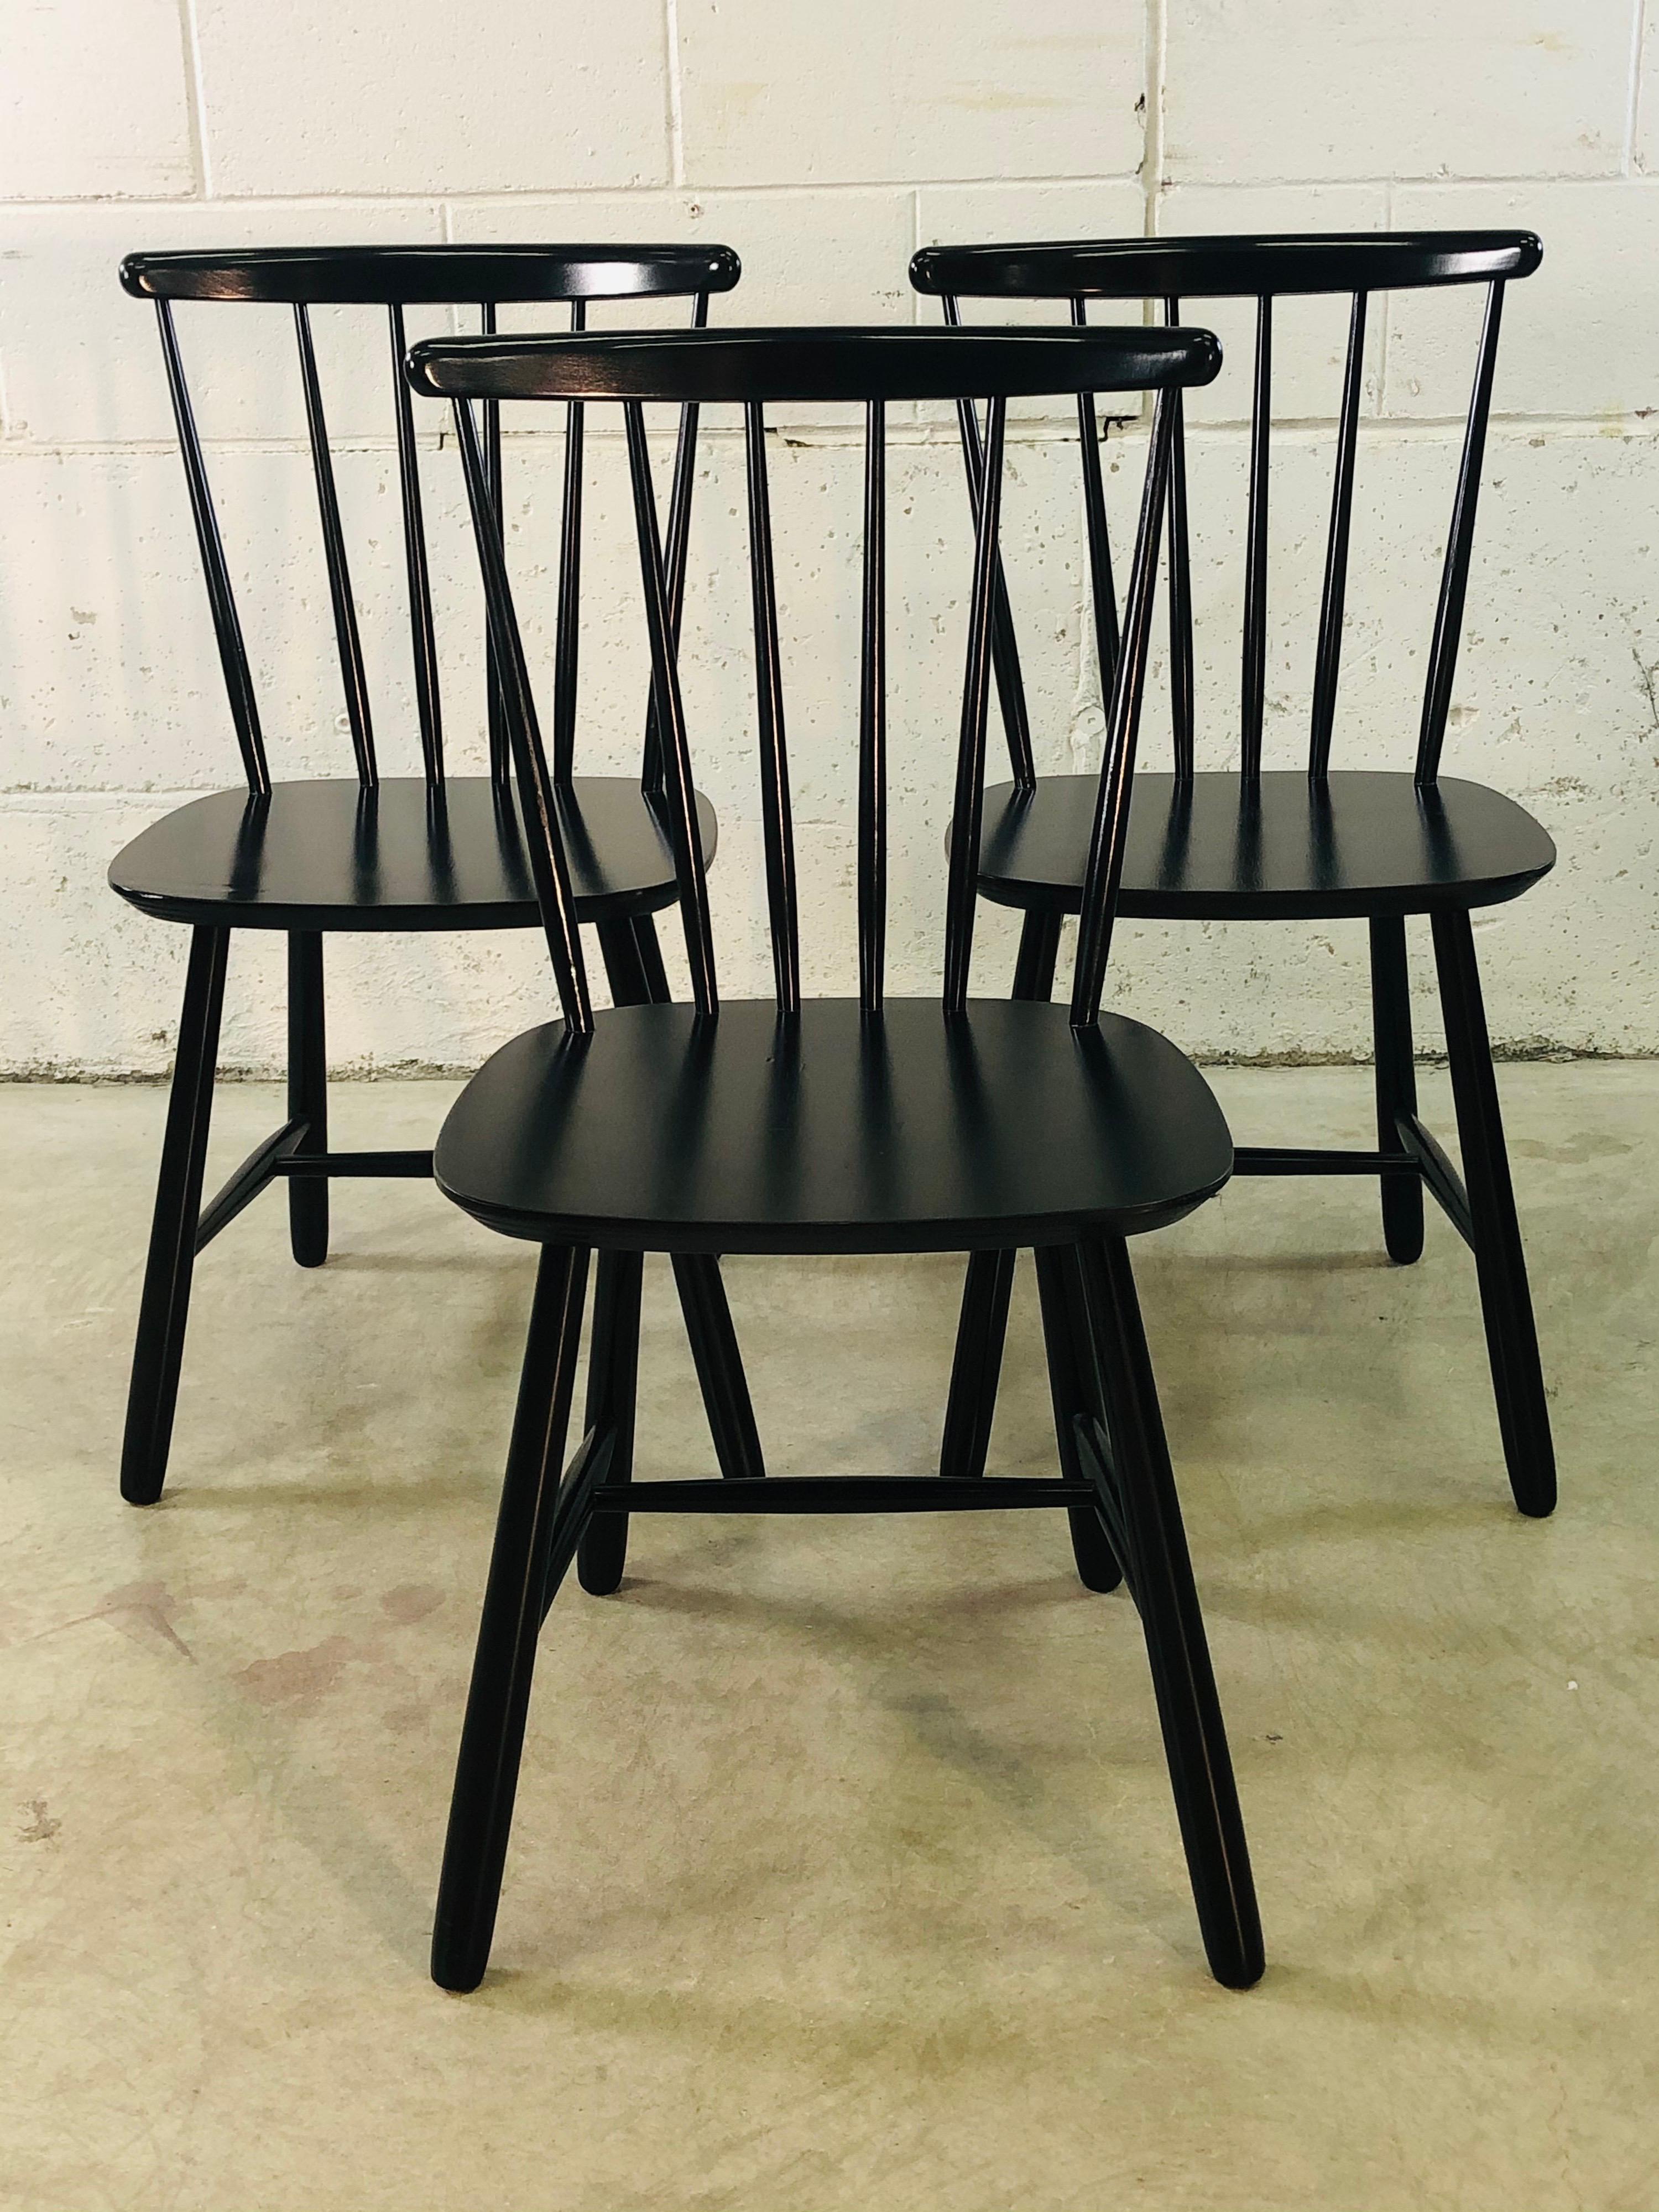 Vintage Danish set of 3 Farstrup Danish dining chairs. The chairs were designed by Thomas Harlev. Newly refinished and painted. Marked underneath. Very sturdy.